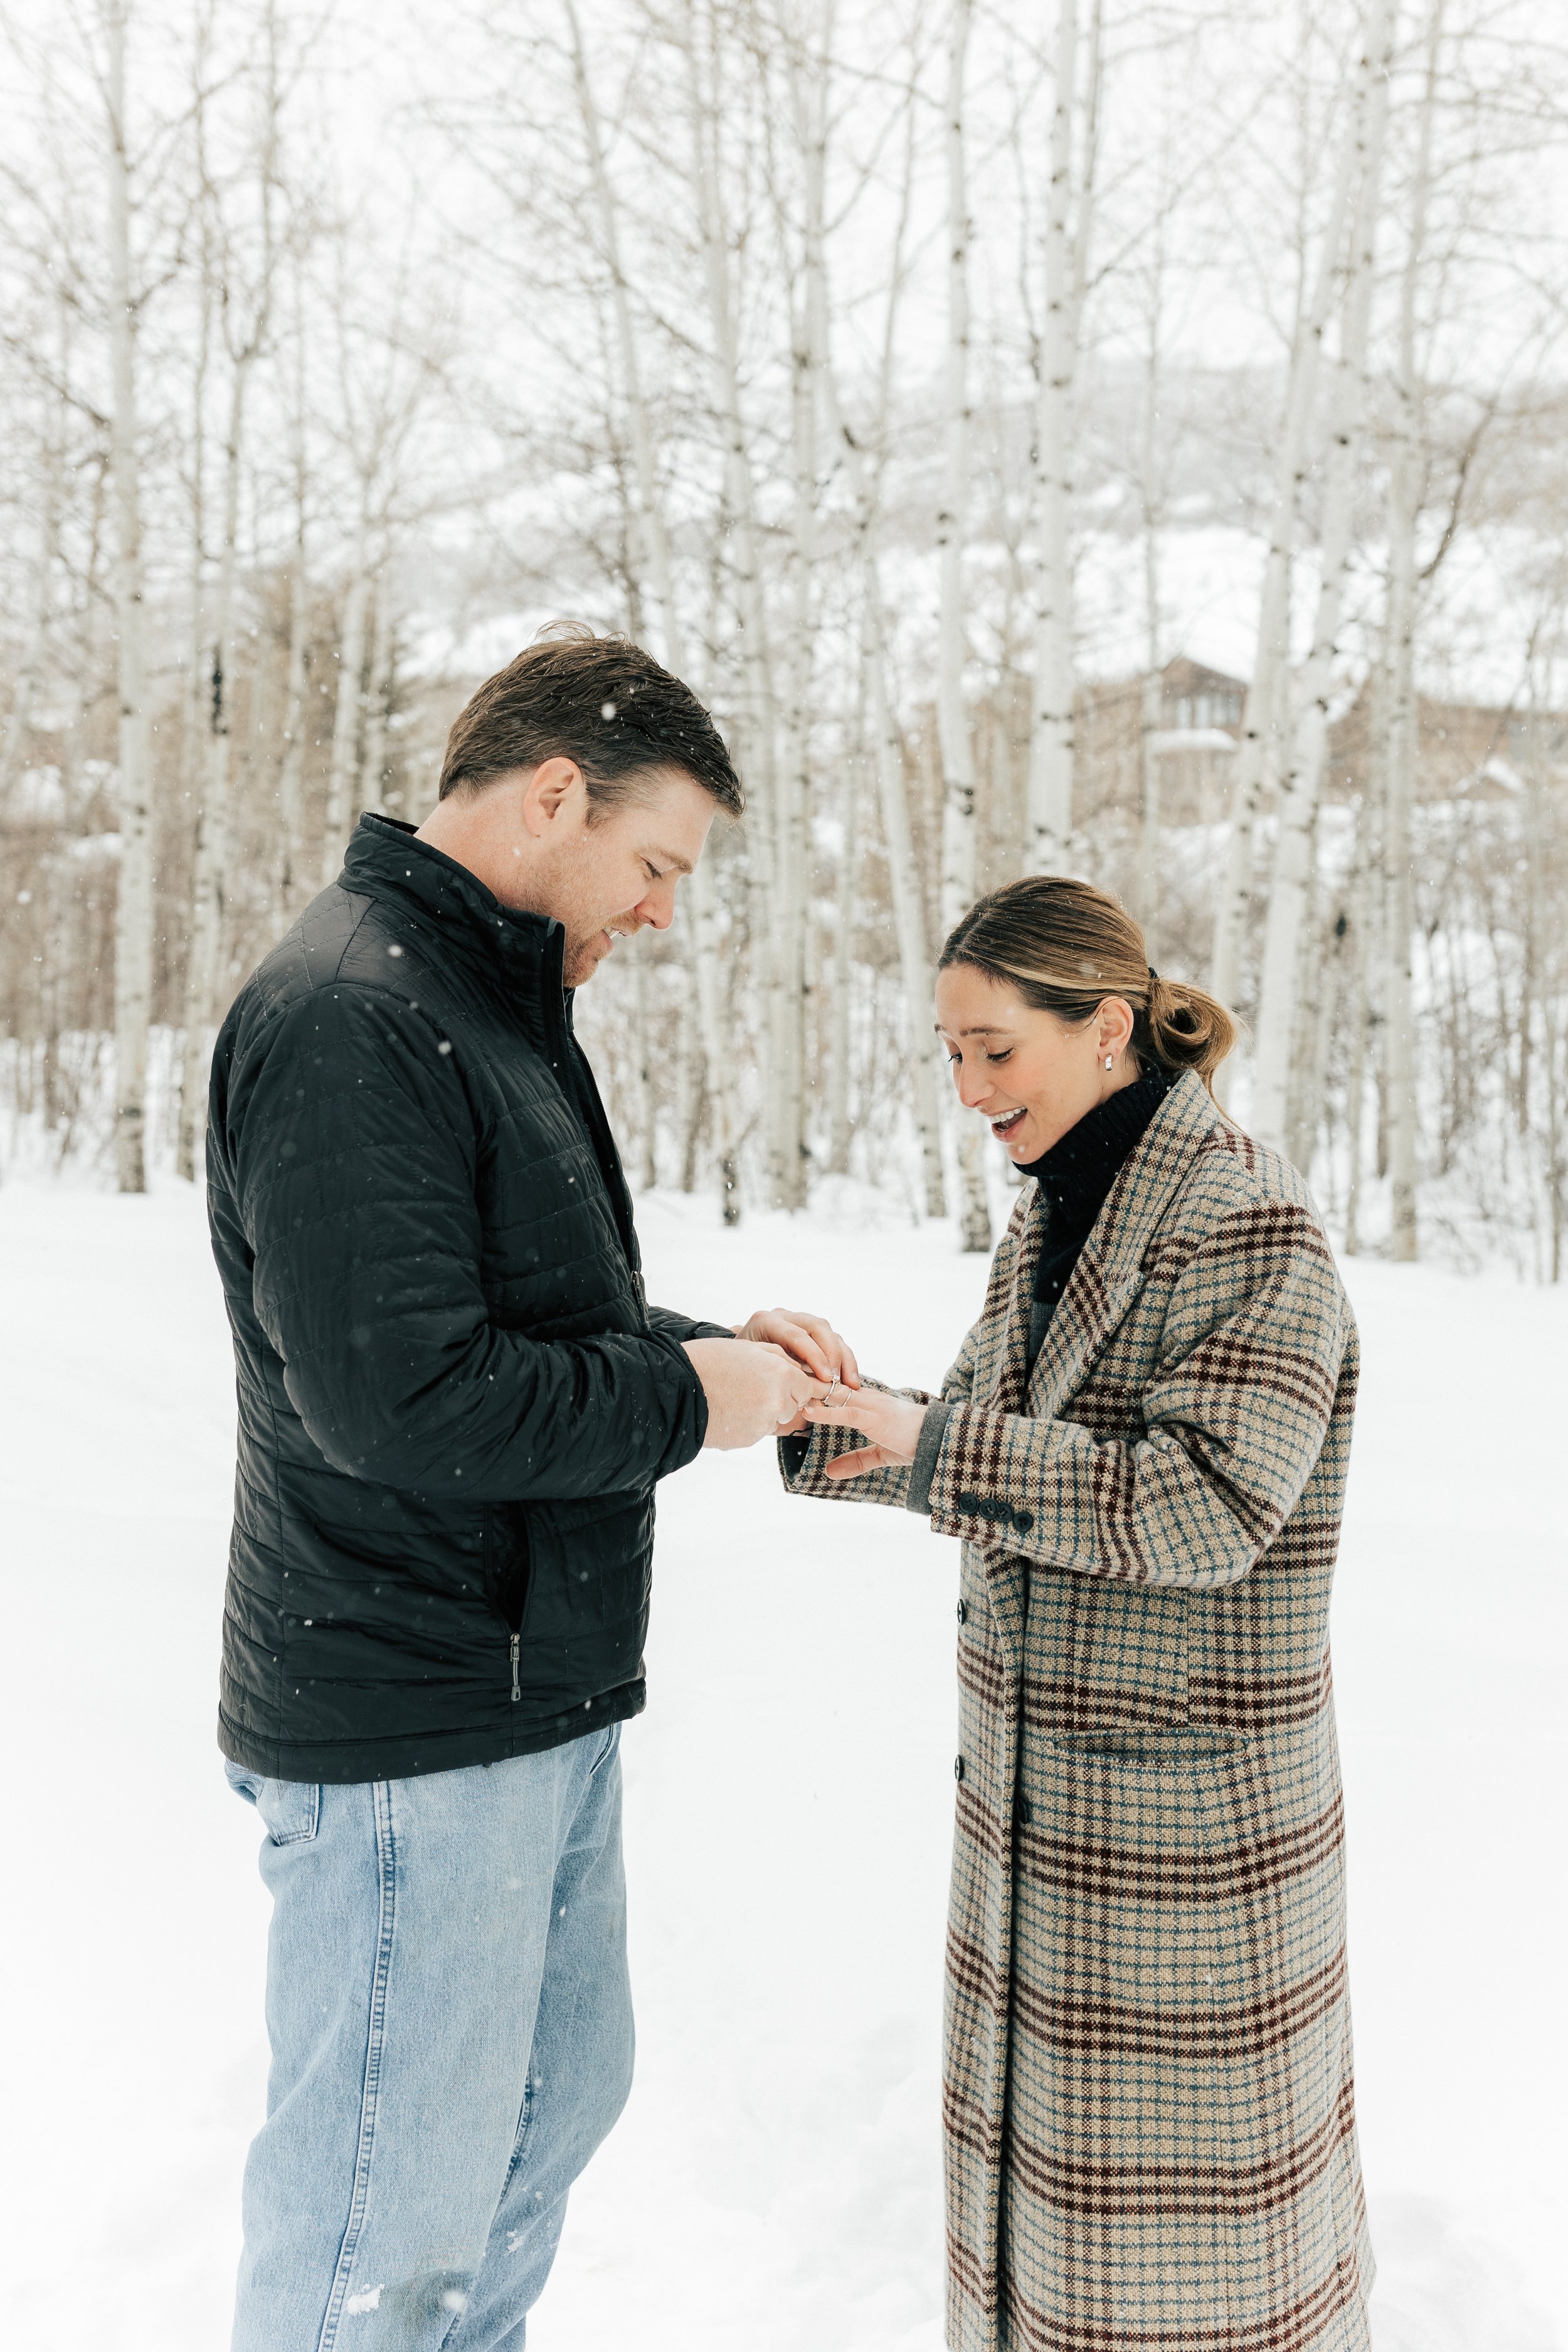  Newly engaged man puts engagement ring on fiancé’s finger. Winter engagement session in Park City, Utah. Boyfriend surprises girlfriend with wedding proposal during a snowy photoshoot. Man proposes to girlfriend. #parkcity #engagements #engagementse